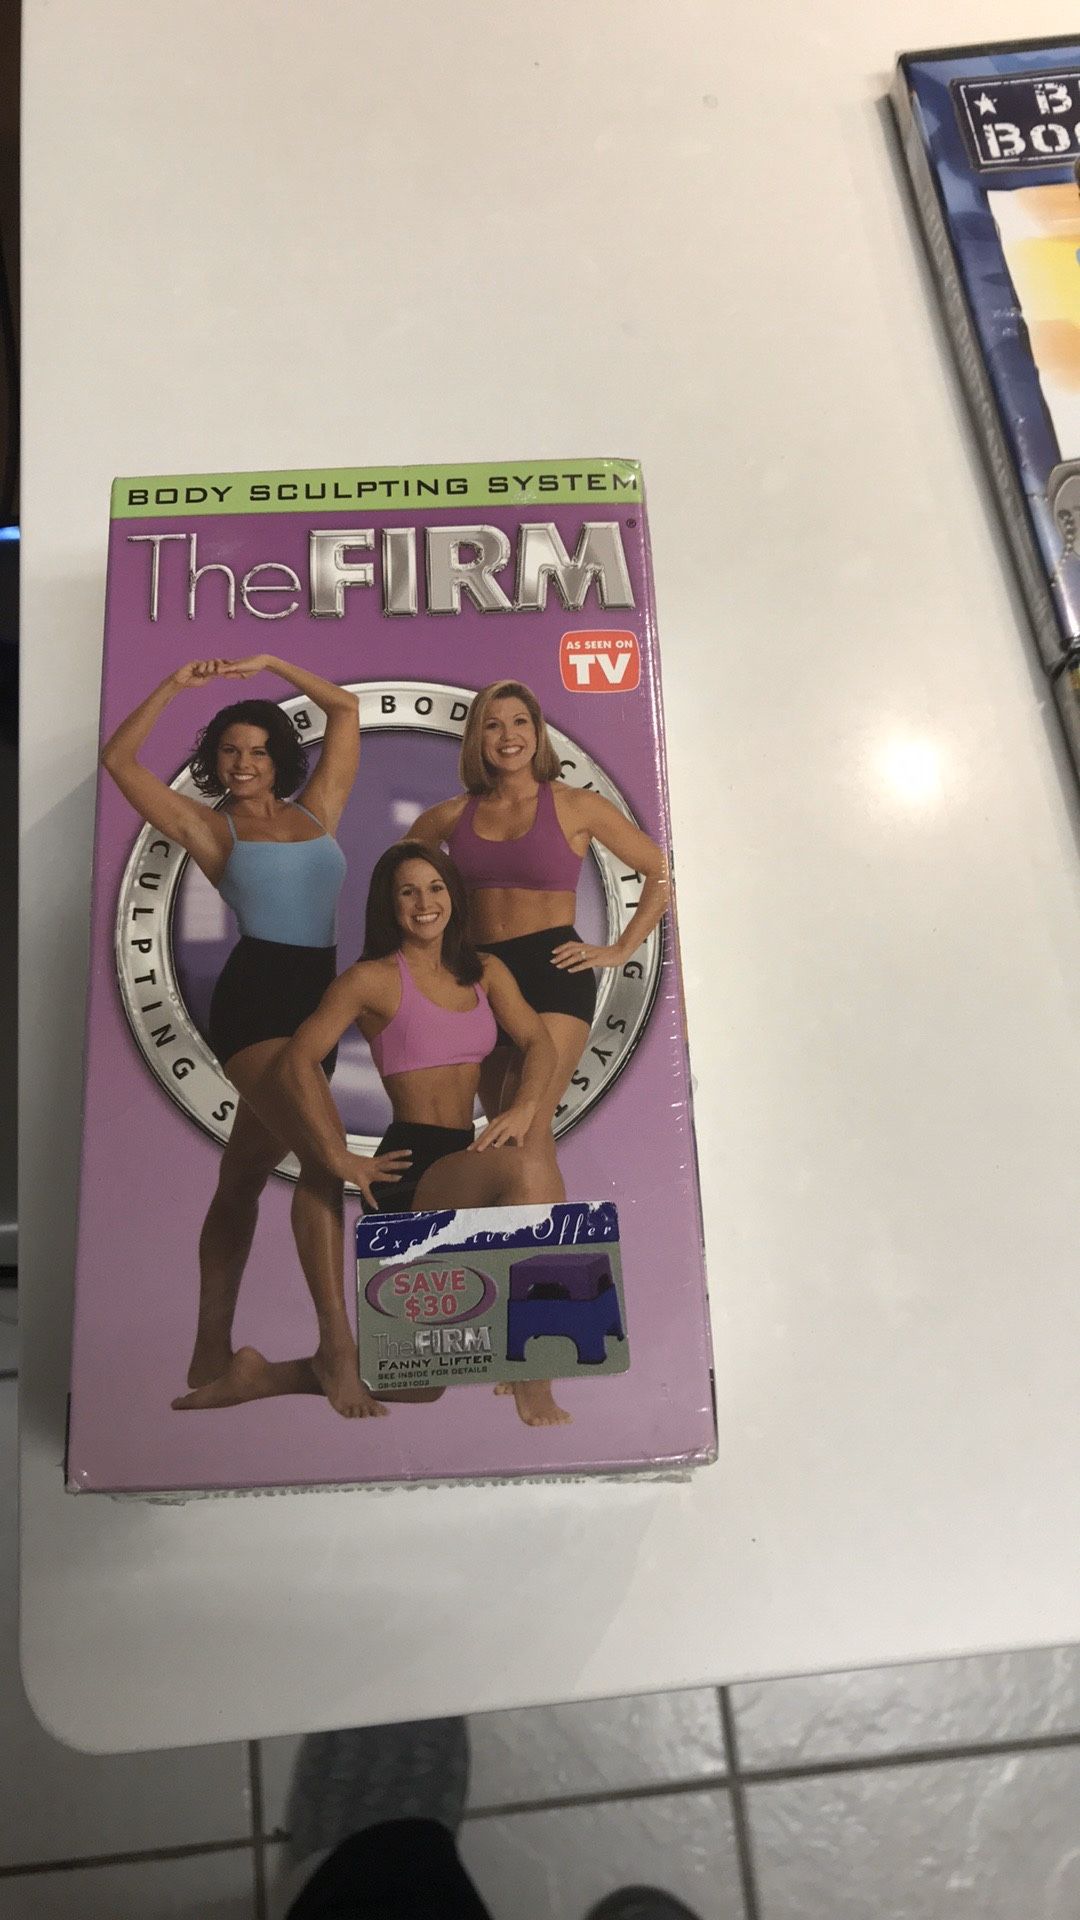 New exercise “the Firm” ladies videos